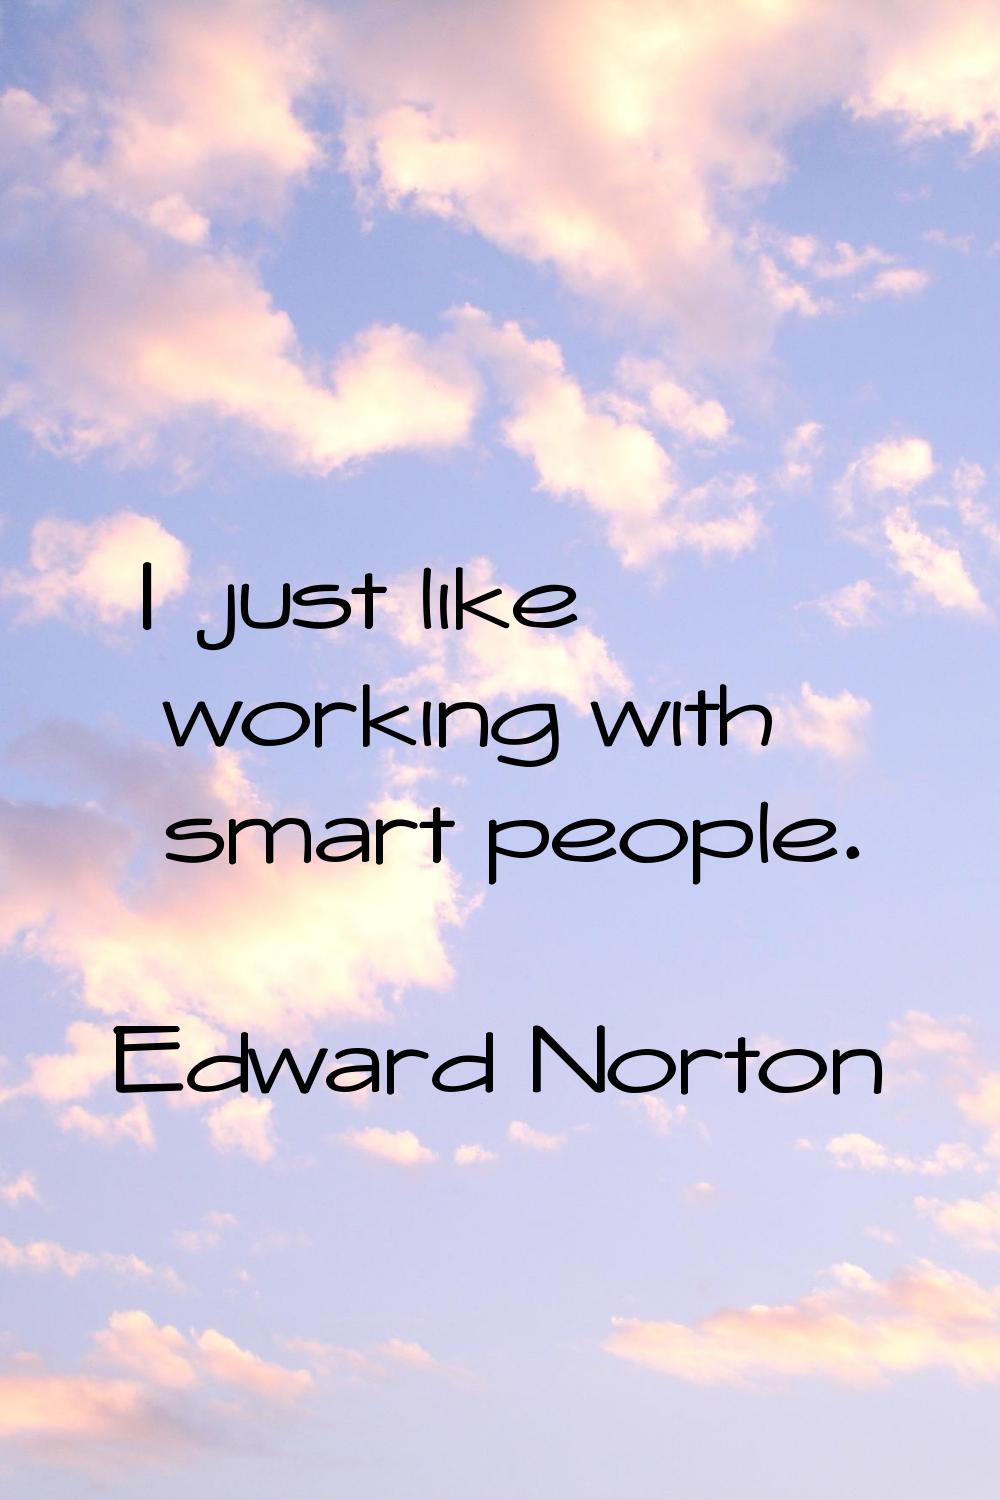 I just like working with smart people.